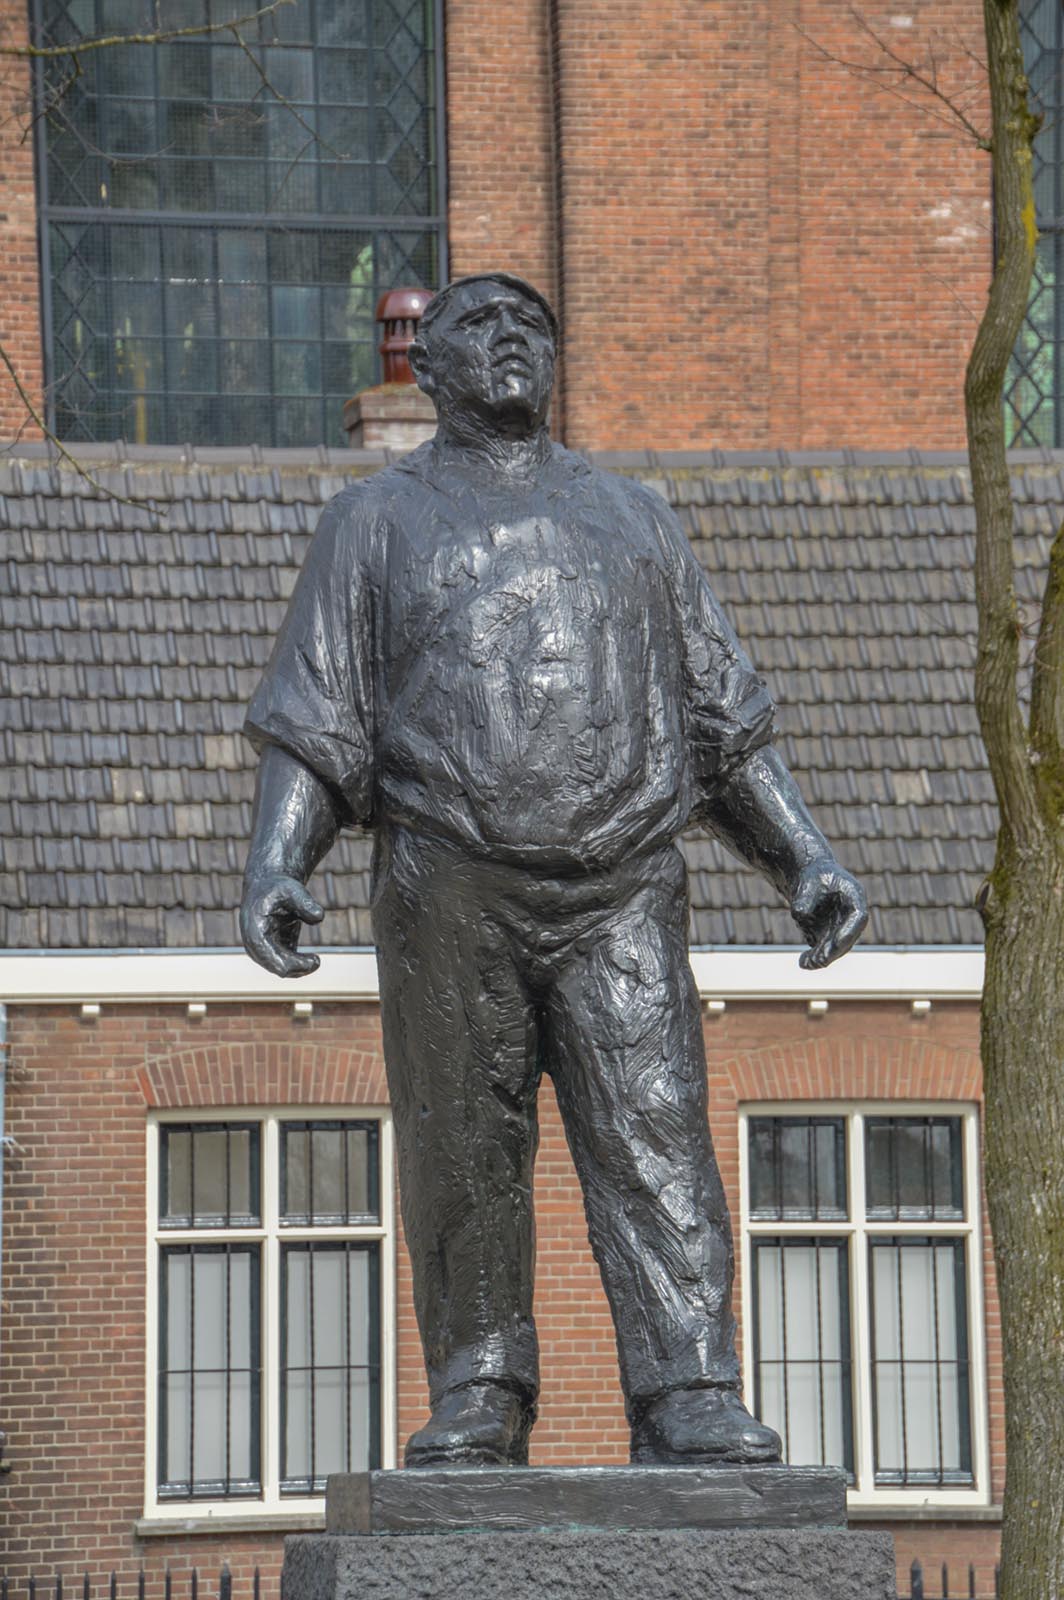 Mary Andriessen's monument in honor of the strike in 1952, depicting a dockworker (Photograph: DutchMen / Shutterstock.com)